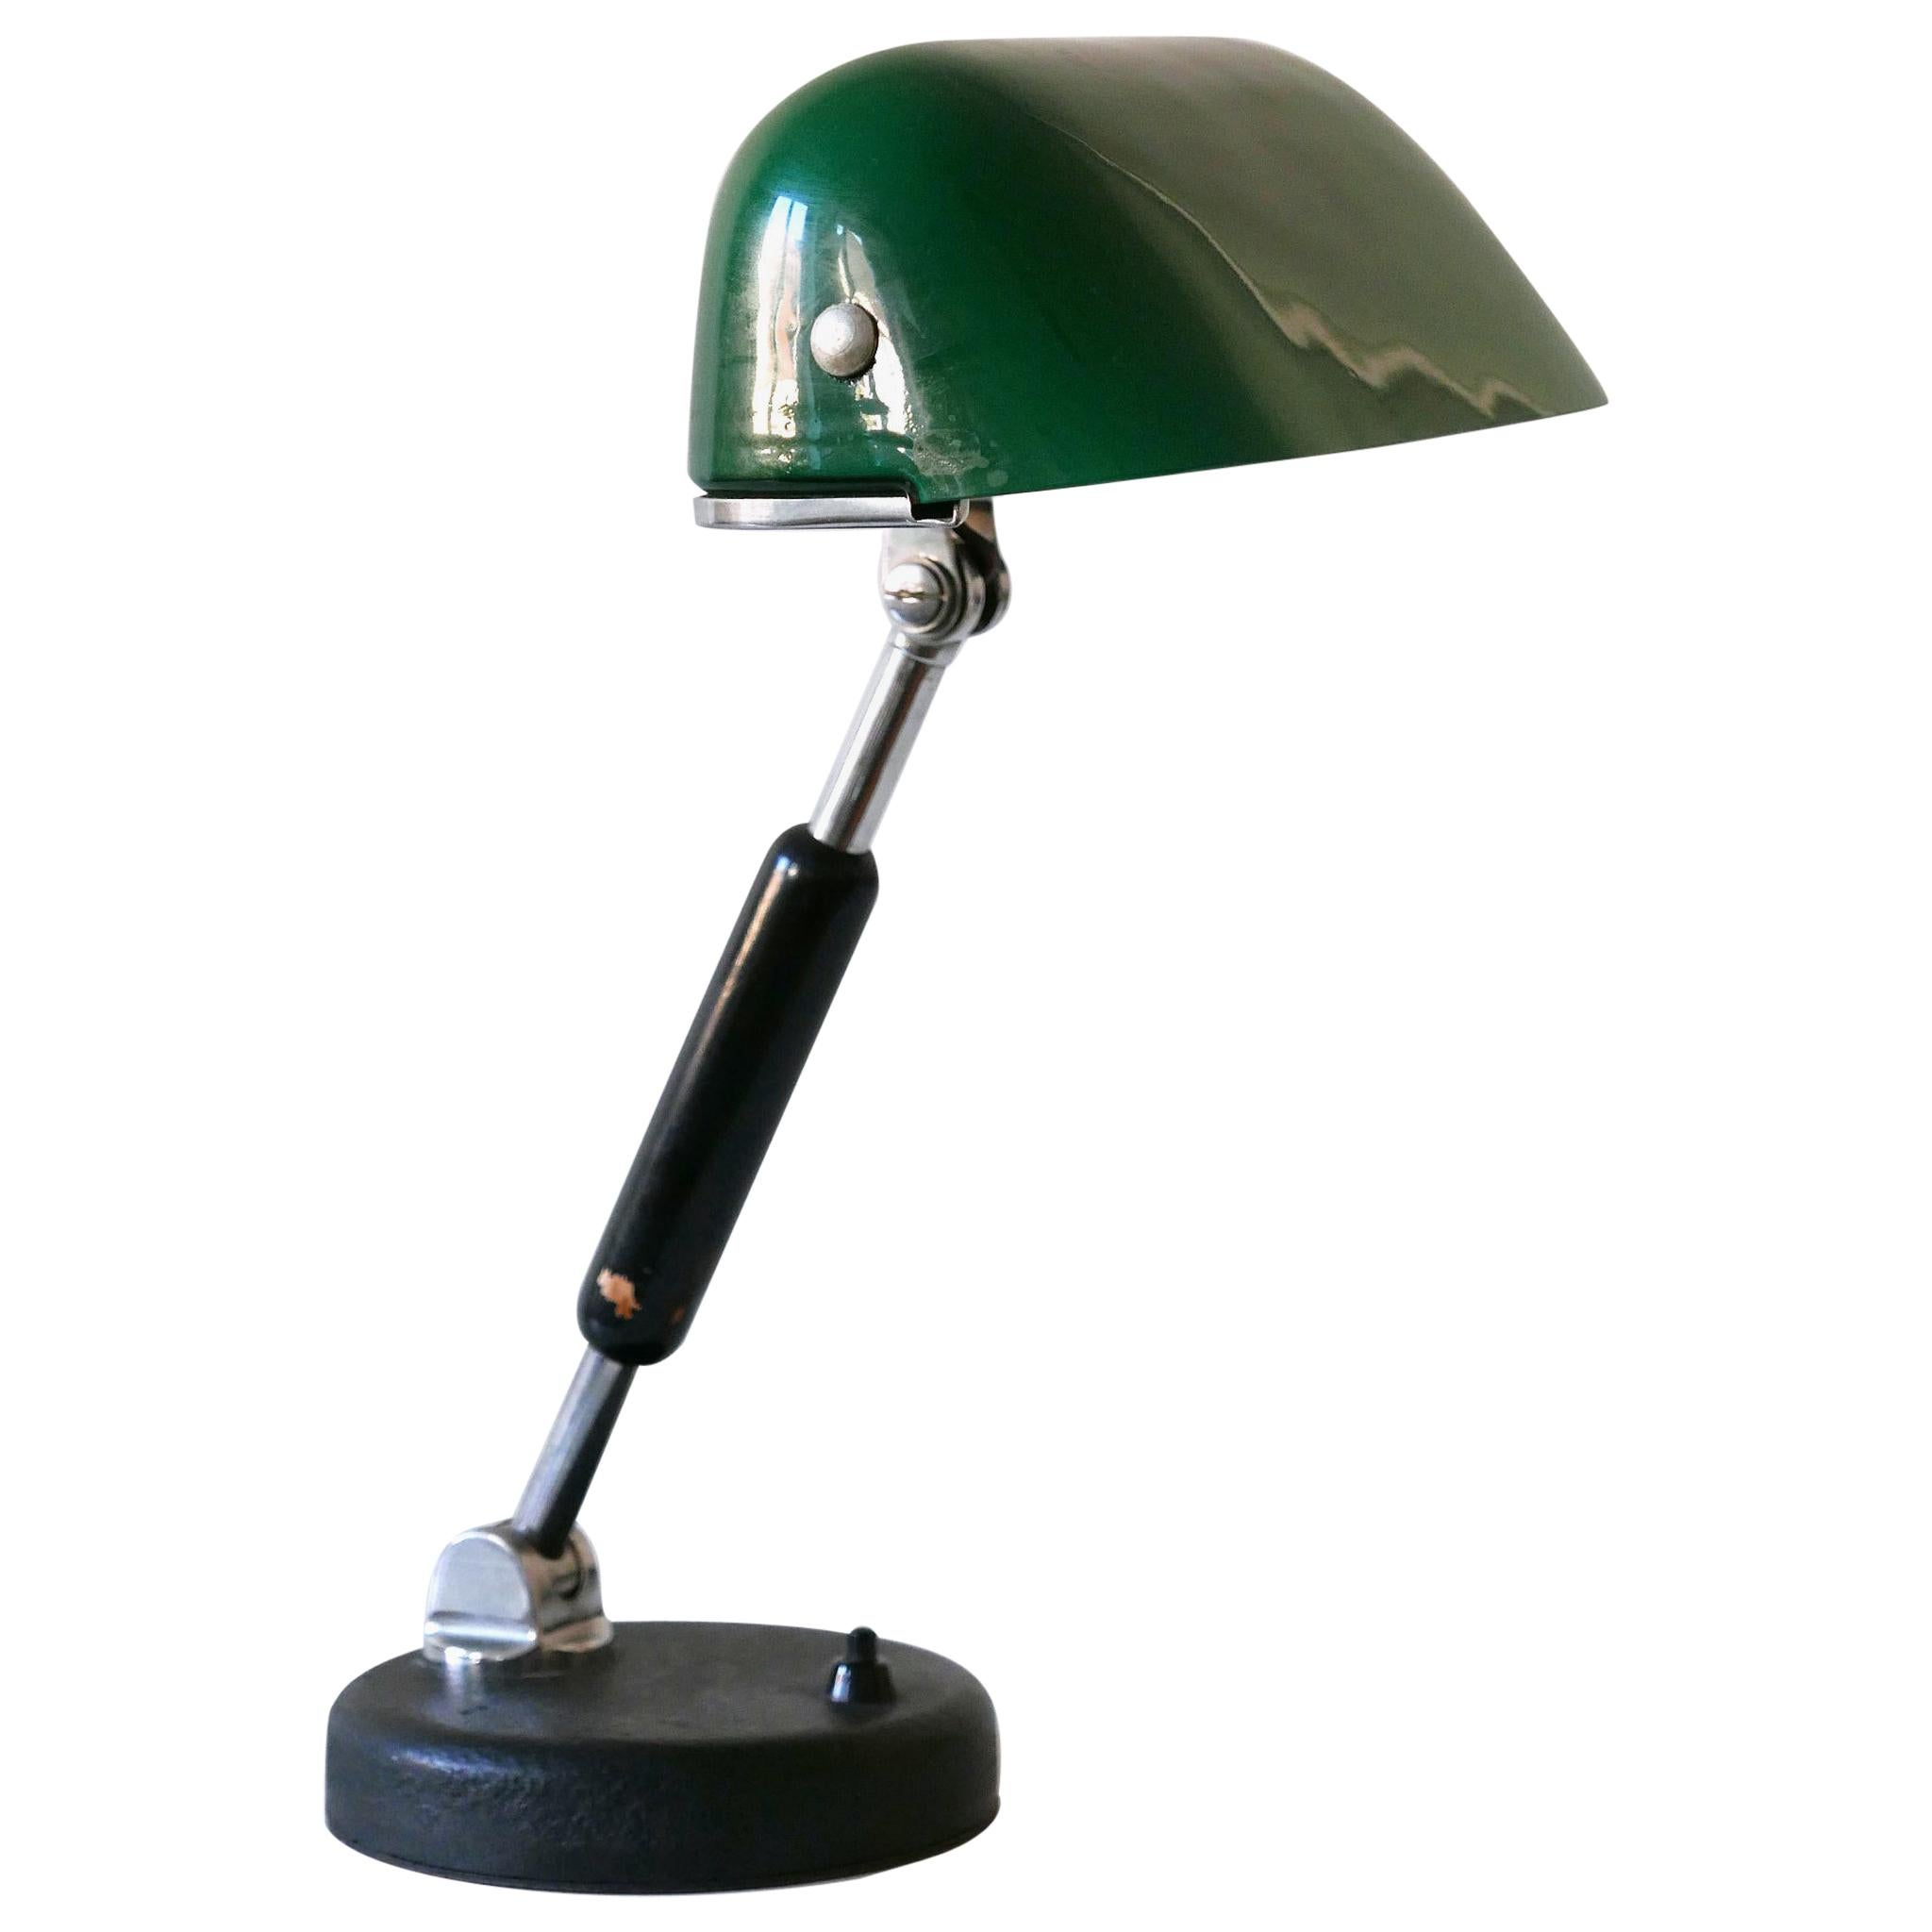 Exceptional Bauhaus Bankers Table Lamp with Original Green Glass, 1930s, Germany